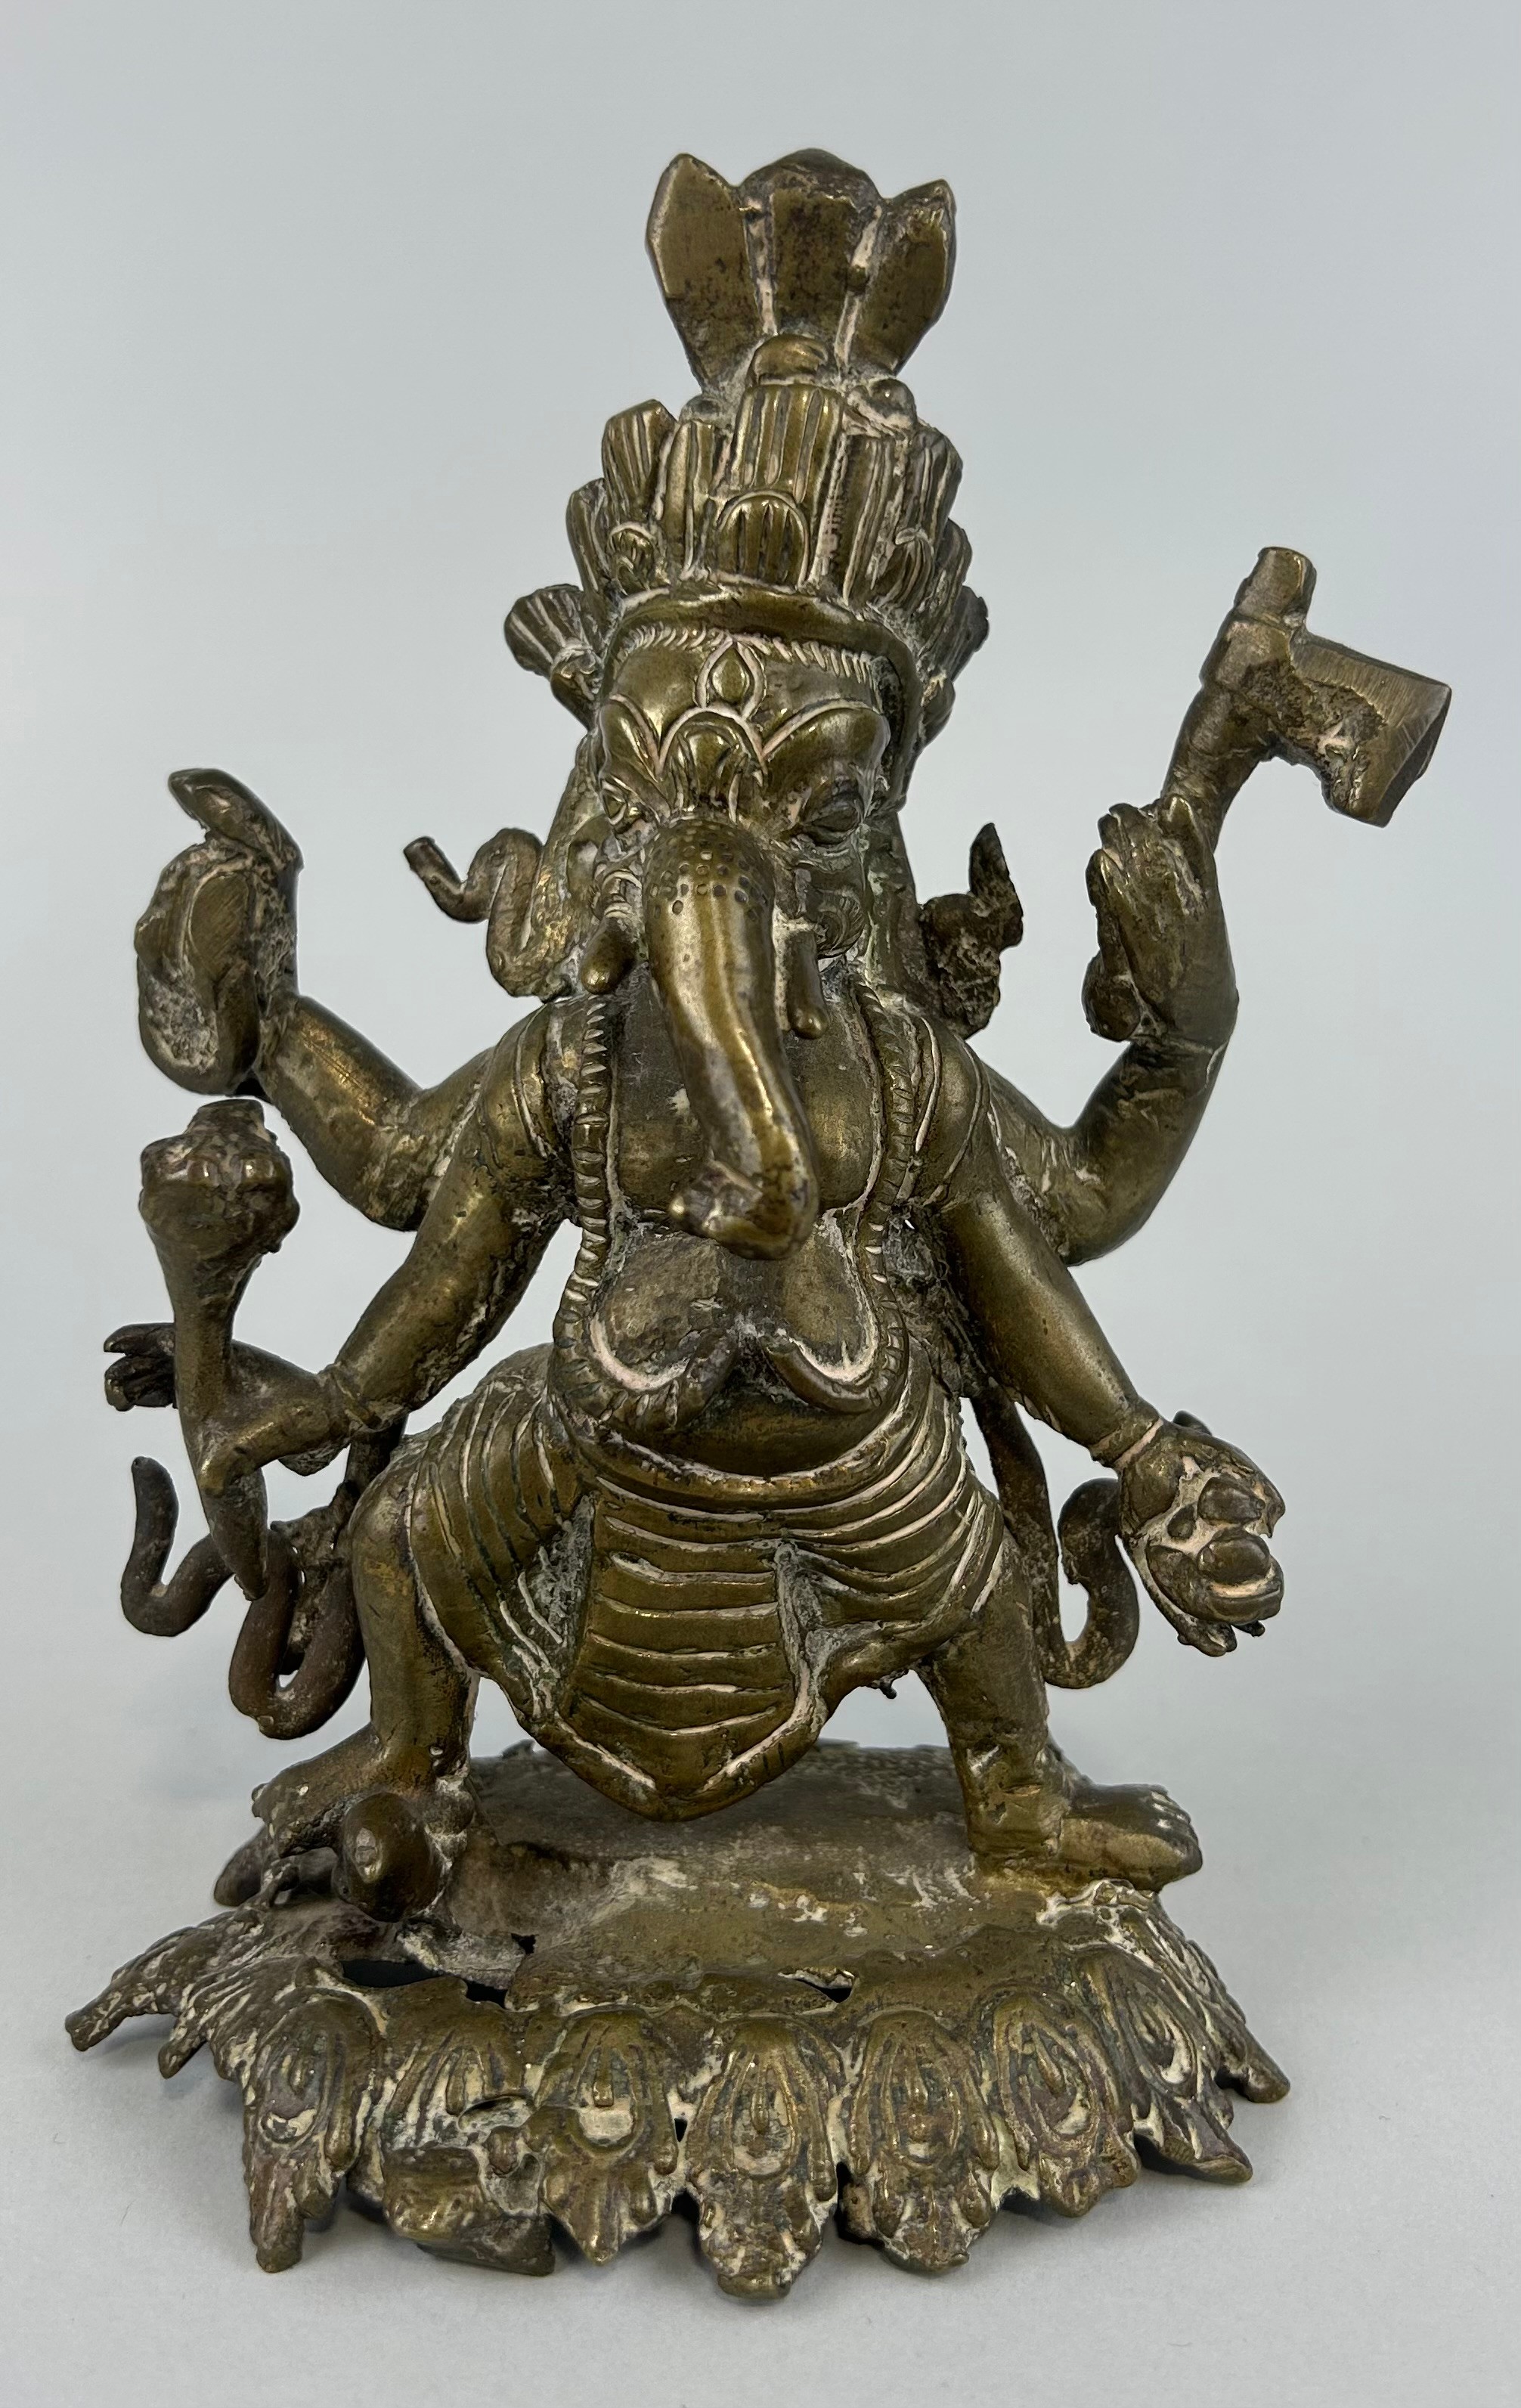 AN INDIAN BRONZE FIGURE OF GANESH PROBABLY 17TH OR 18TH CENTURY, 18cm x 11cm